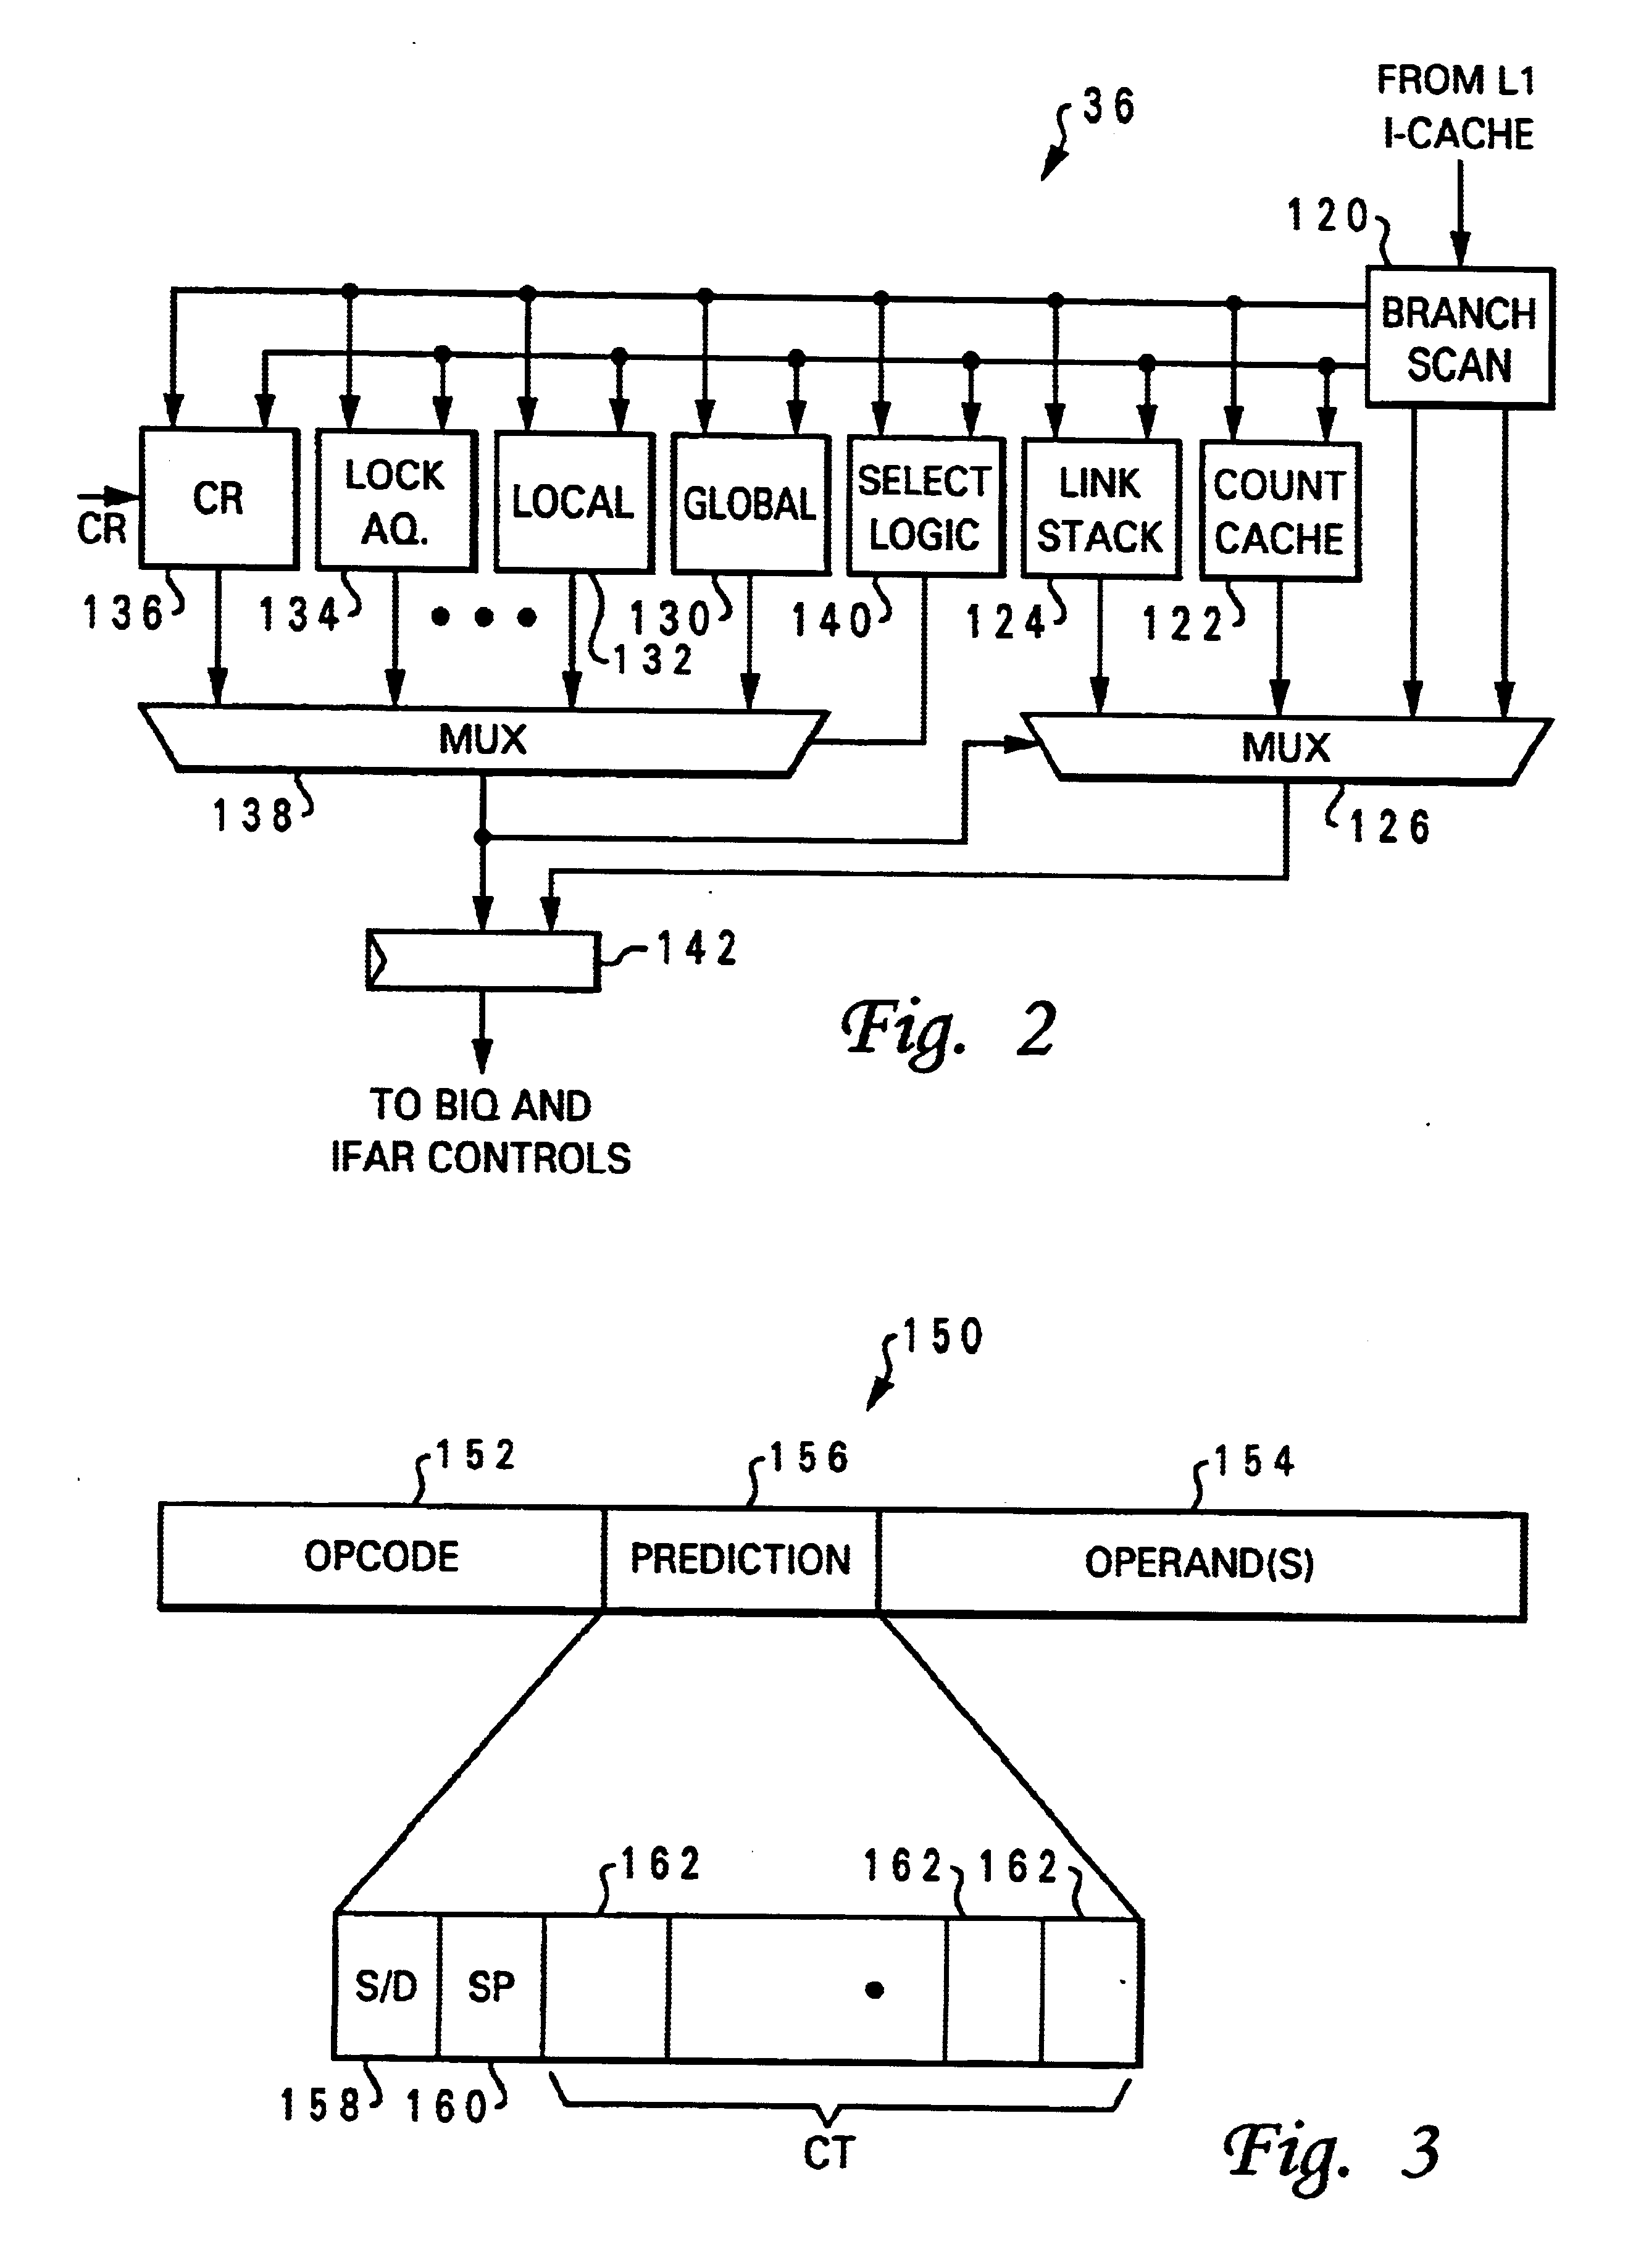 Processor and method for separately predicting conditional branches dependent on lock acquisition